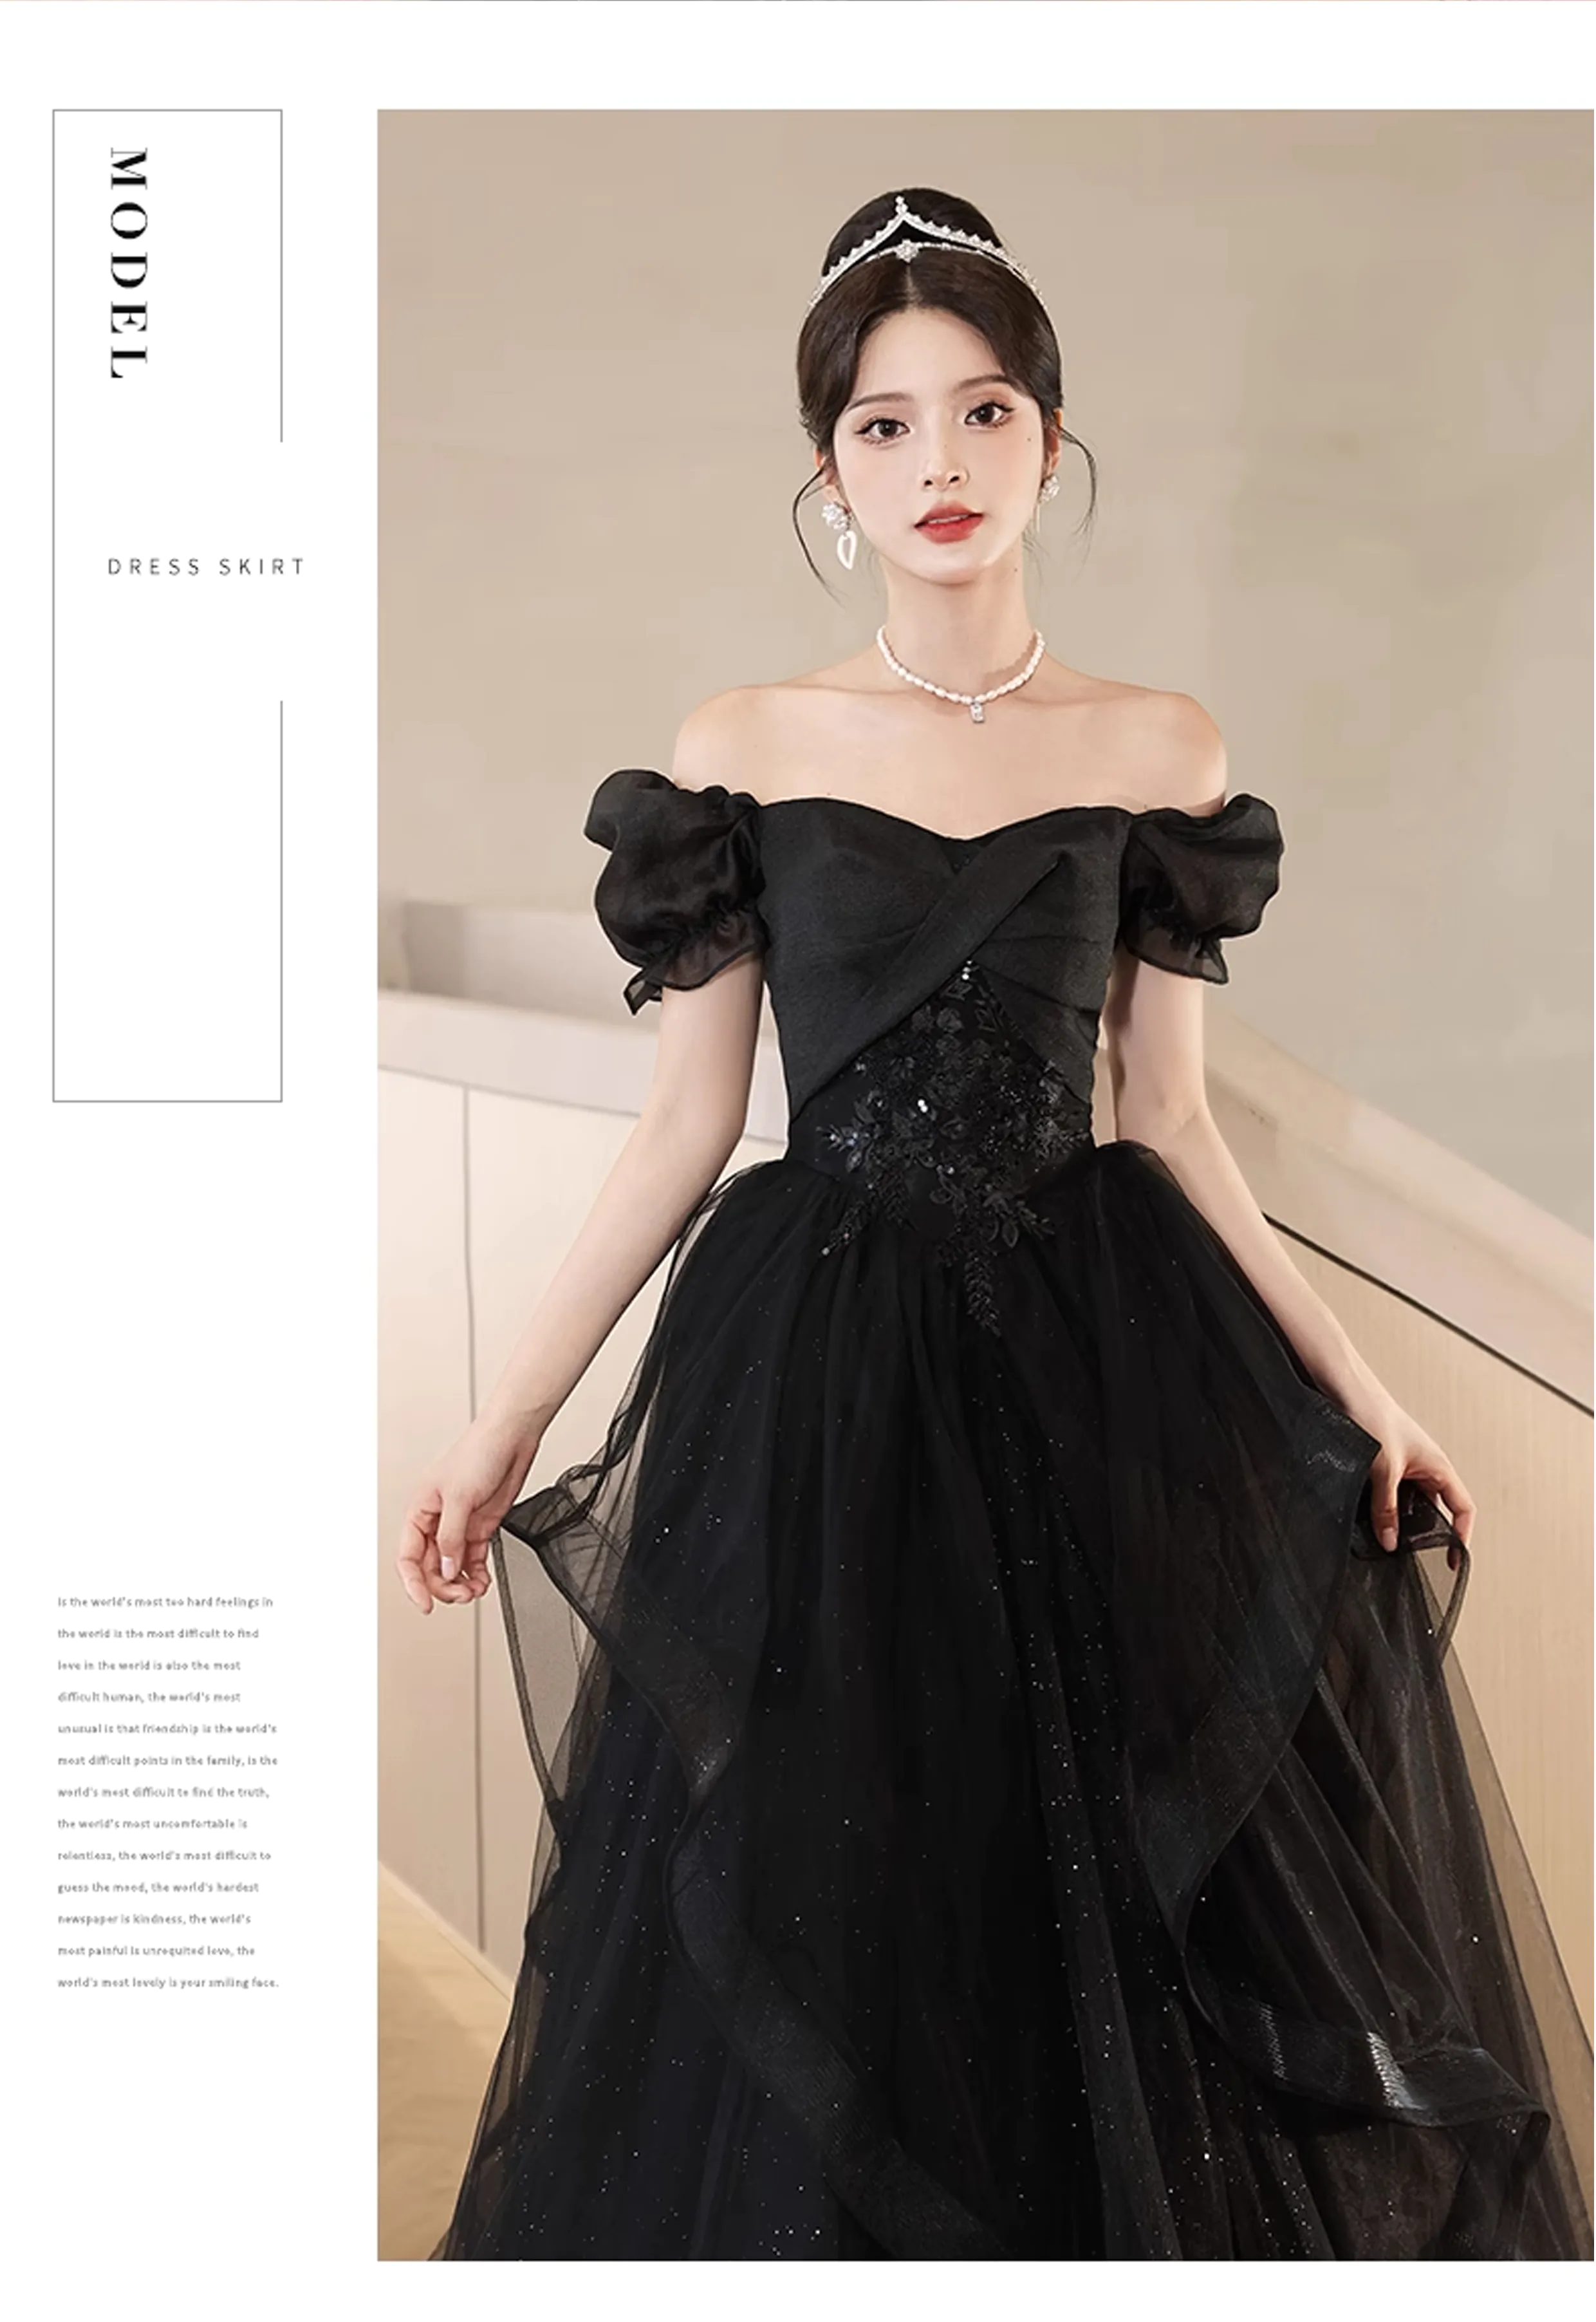 Black-Chiffon-Birthday-Party-Prom-Dress-Cocktail-Evening-Ball-Gown11